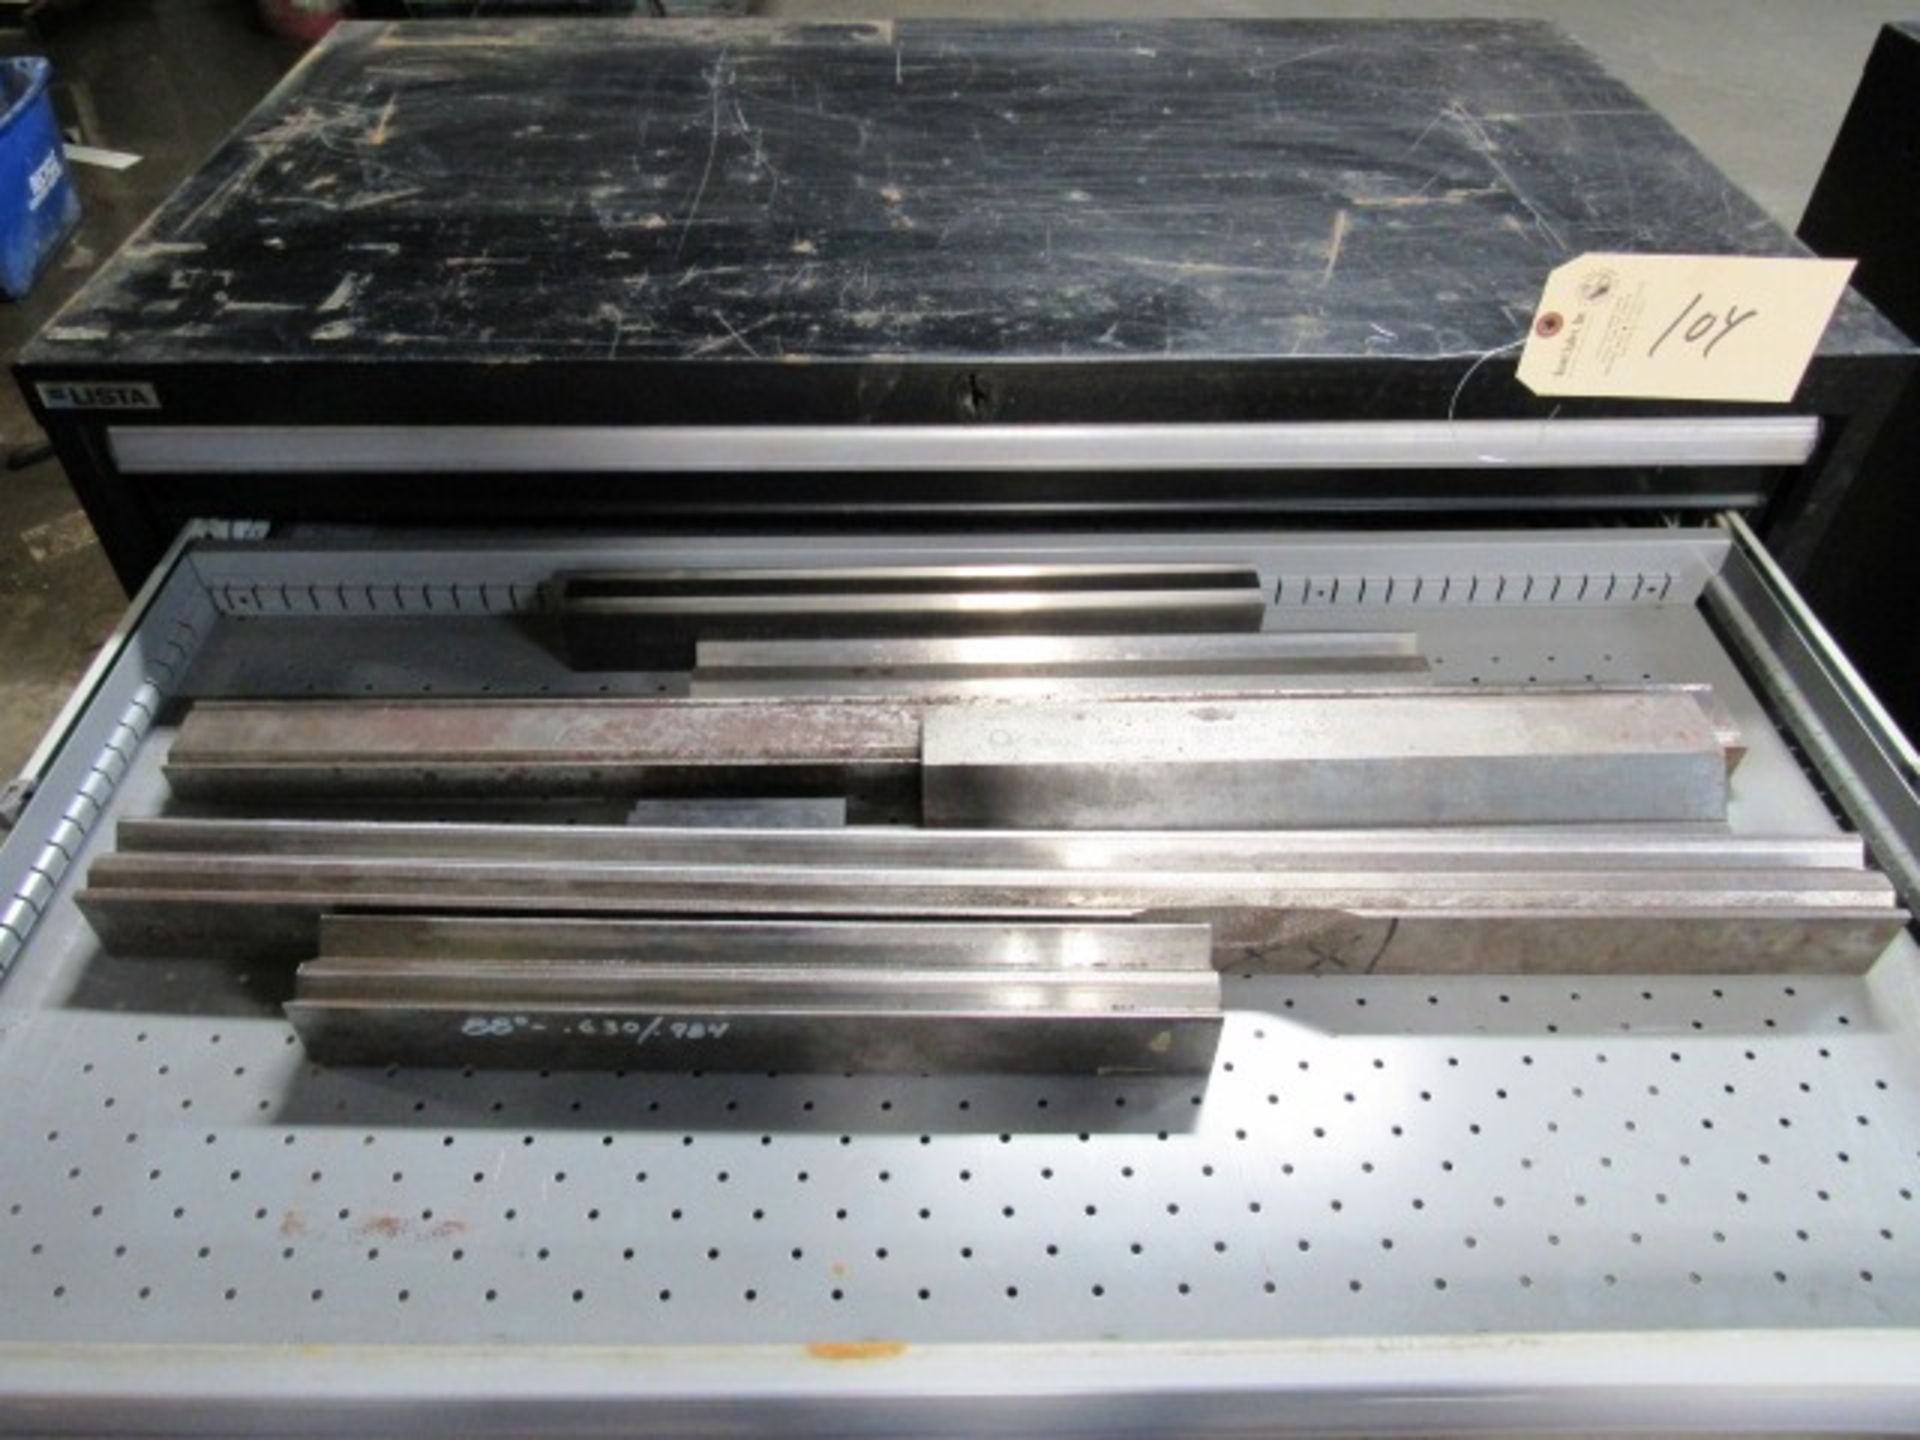 Lista 7 Drawer Cabinet with Press Brake Dies - Image 7 of 8